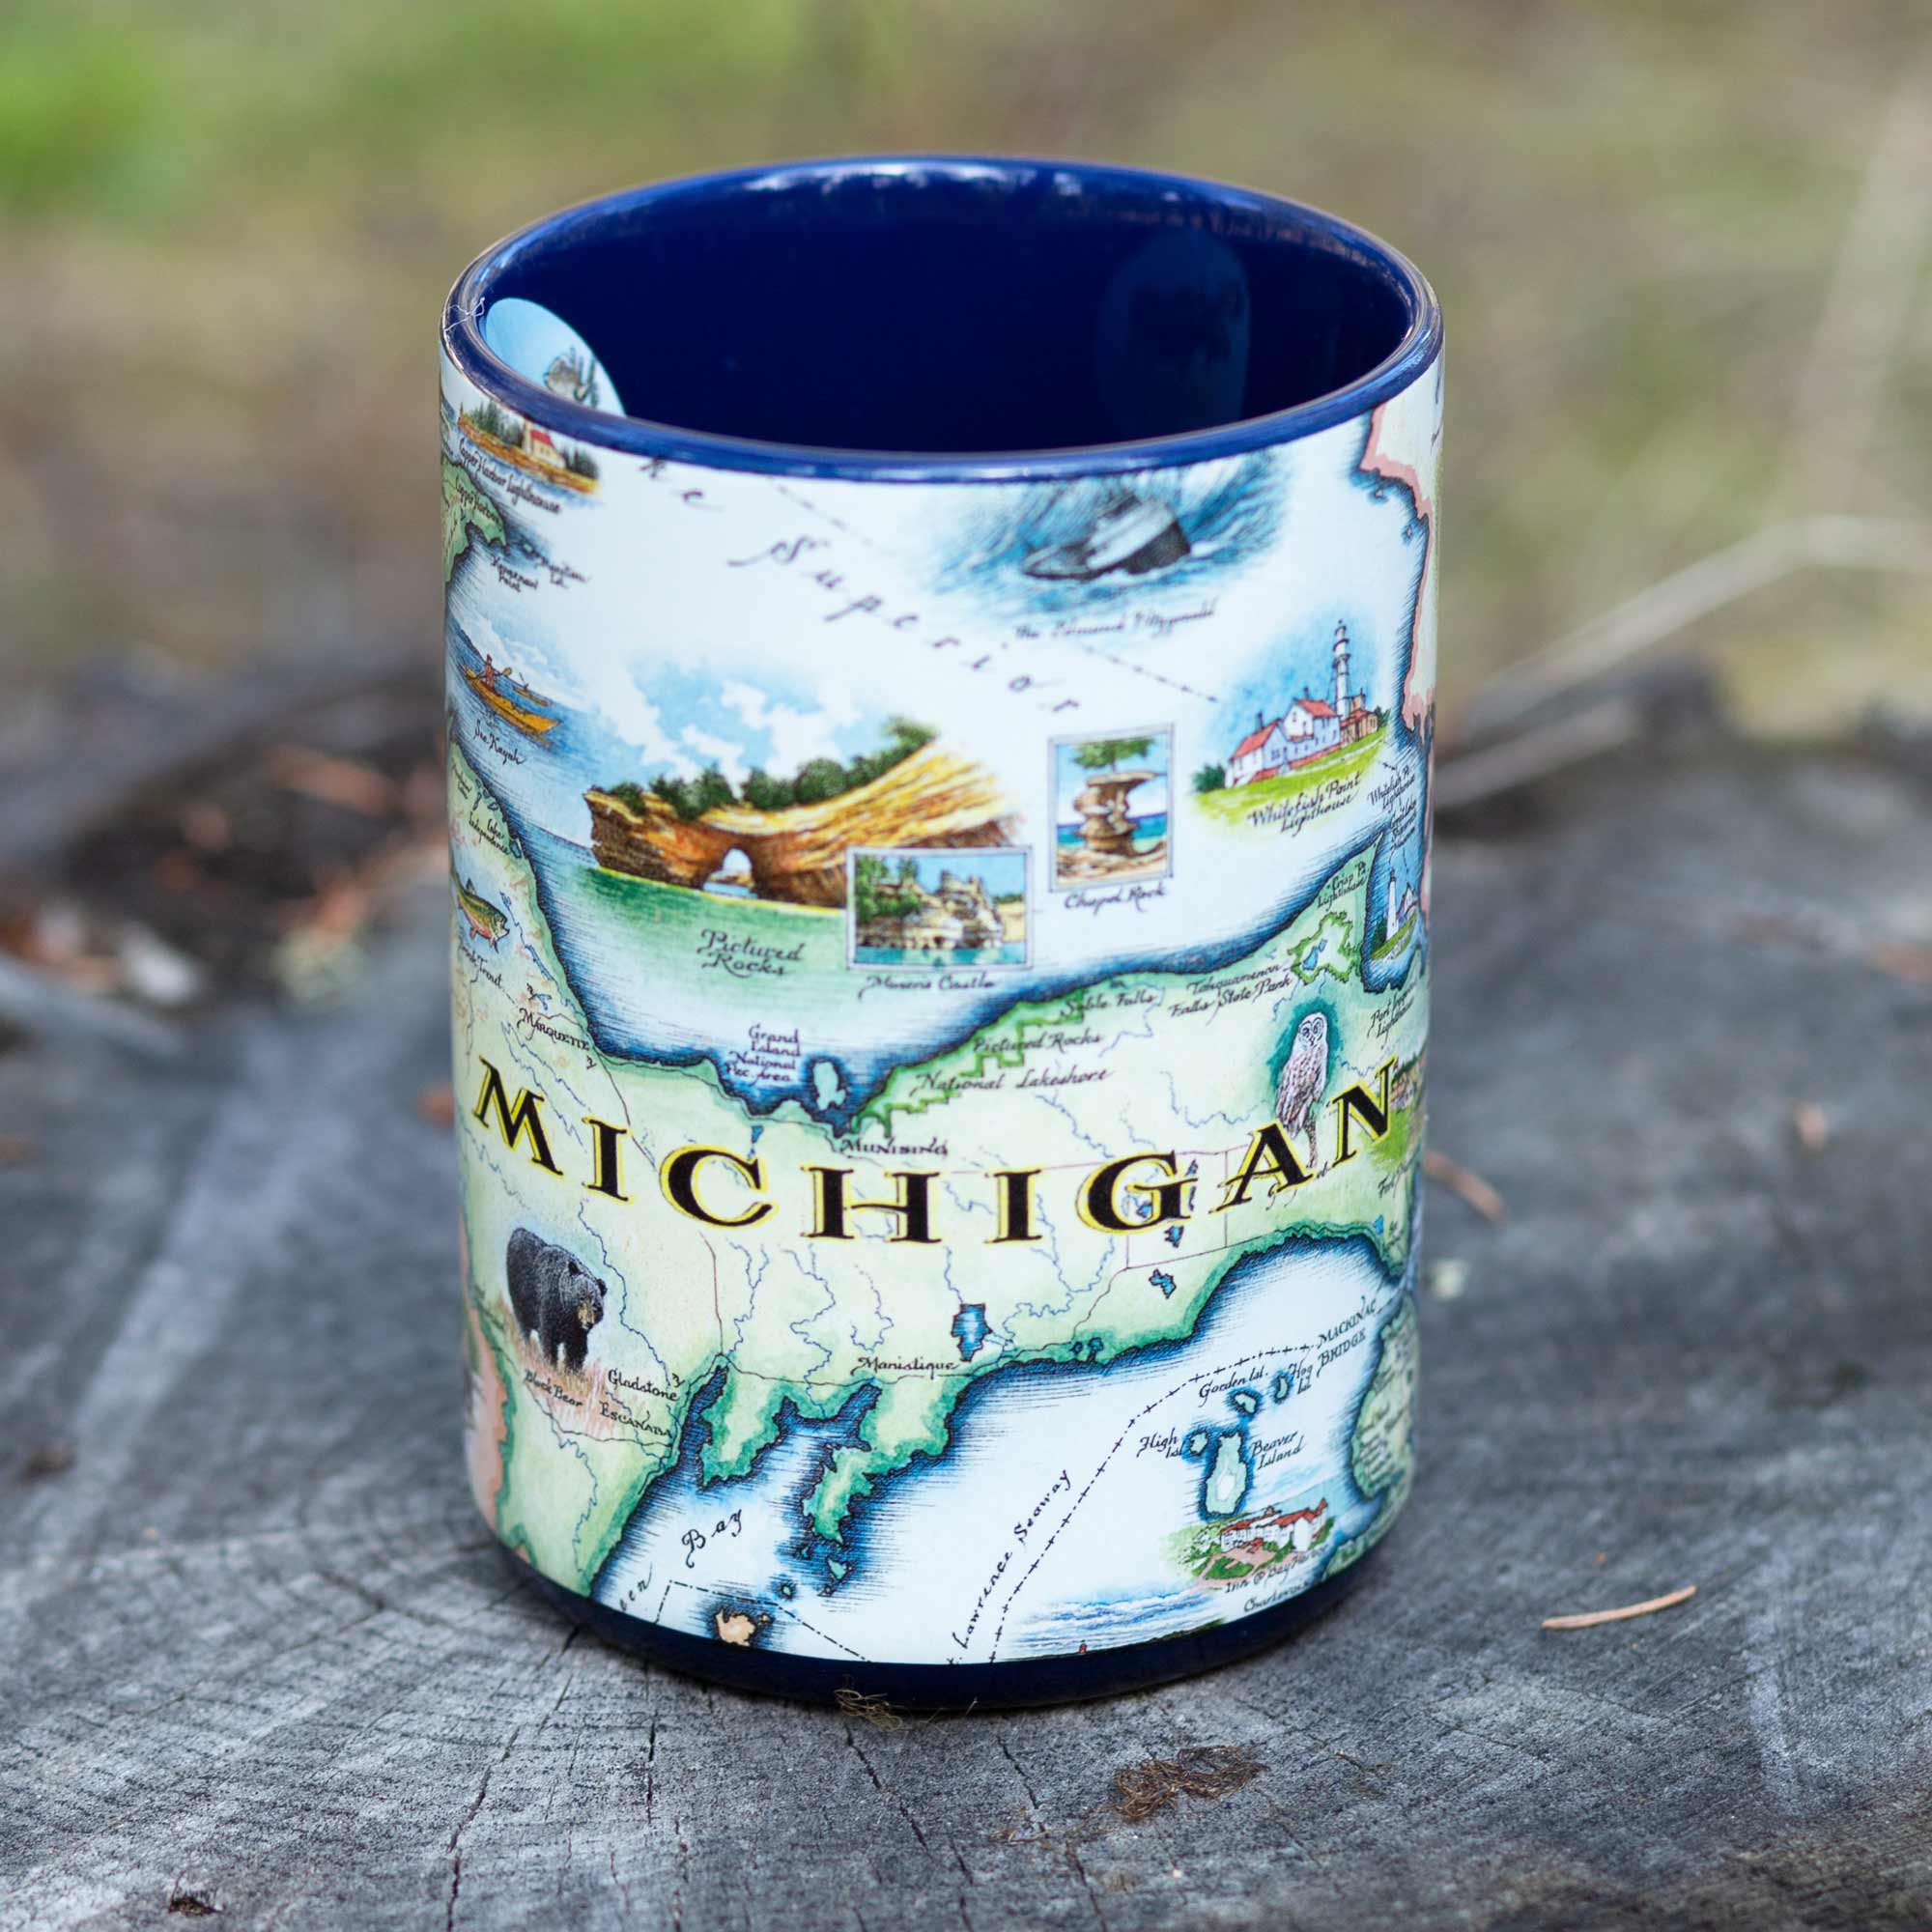 Michigan State Map Ceramic Mug sitting on a log in a forest. The cup features moose, elk, bear, great lakes, lighthouse, fish, Kalamazoo windmill, Detroit, Lansing, Stevie Wonder, Ford Model T, cherries, wolverine, loons, and owls. 